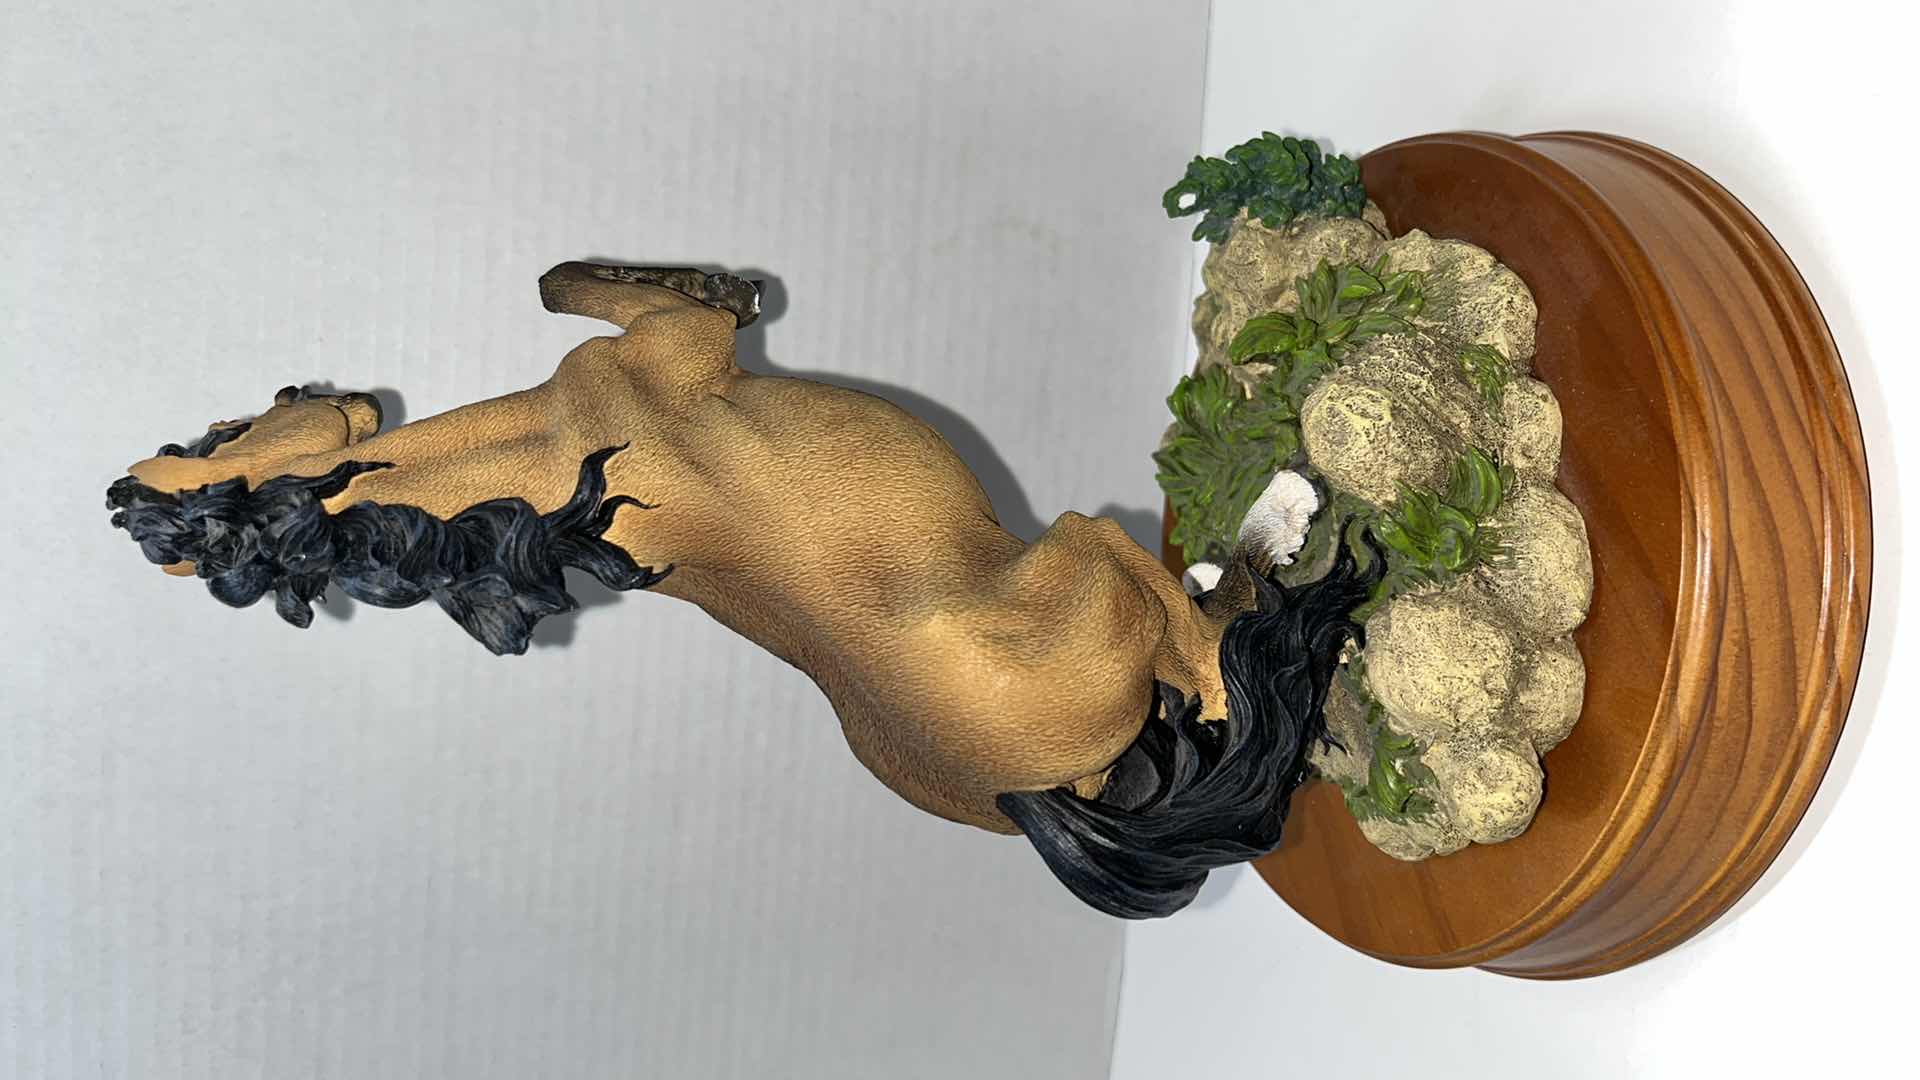 Photo 3 of THE SAN FRANCISCO MUSIC BOX & GIFT CO NATIONAL GEOGRAPHIC SOCIETY WILDLIFE COLLECTION LIMITED EDITION HORSE STATUE & MUSIC BOX “CLAIR DE LUNE”, #13 OF 7,500